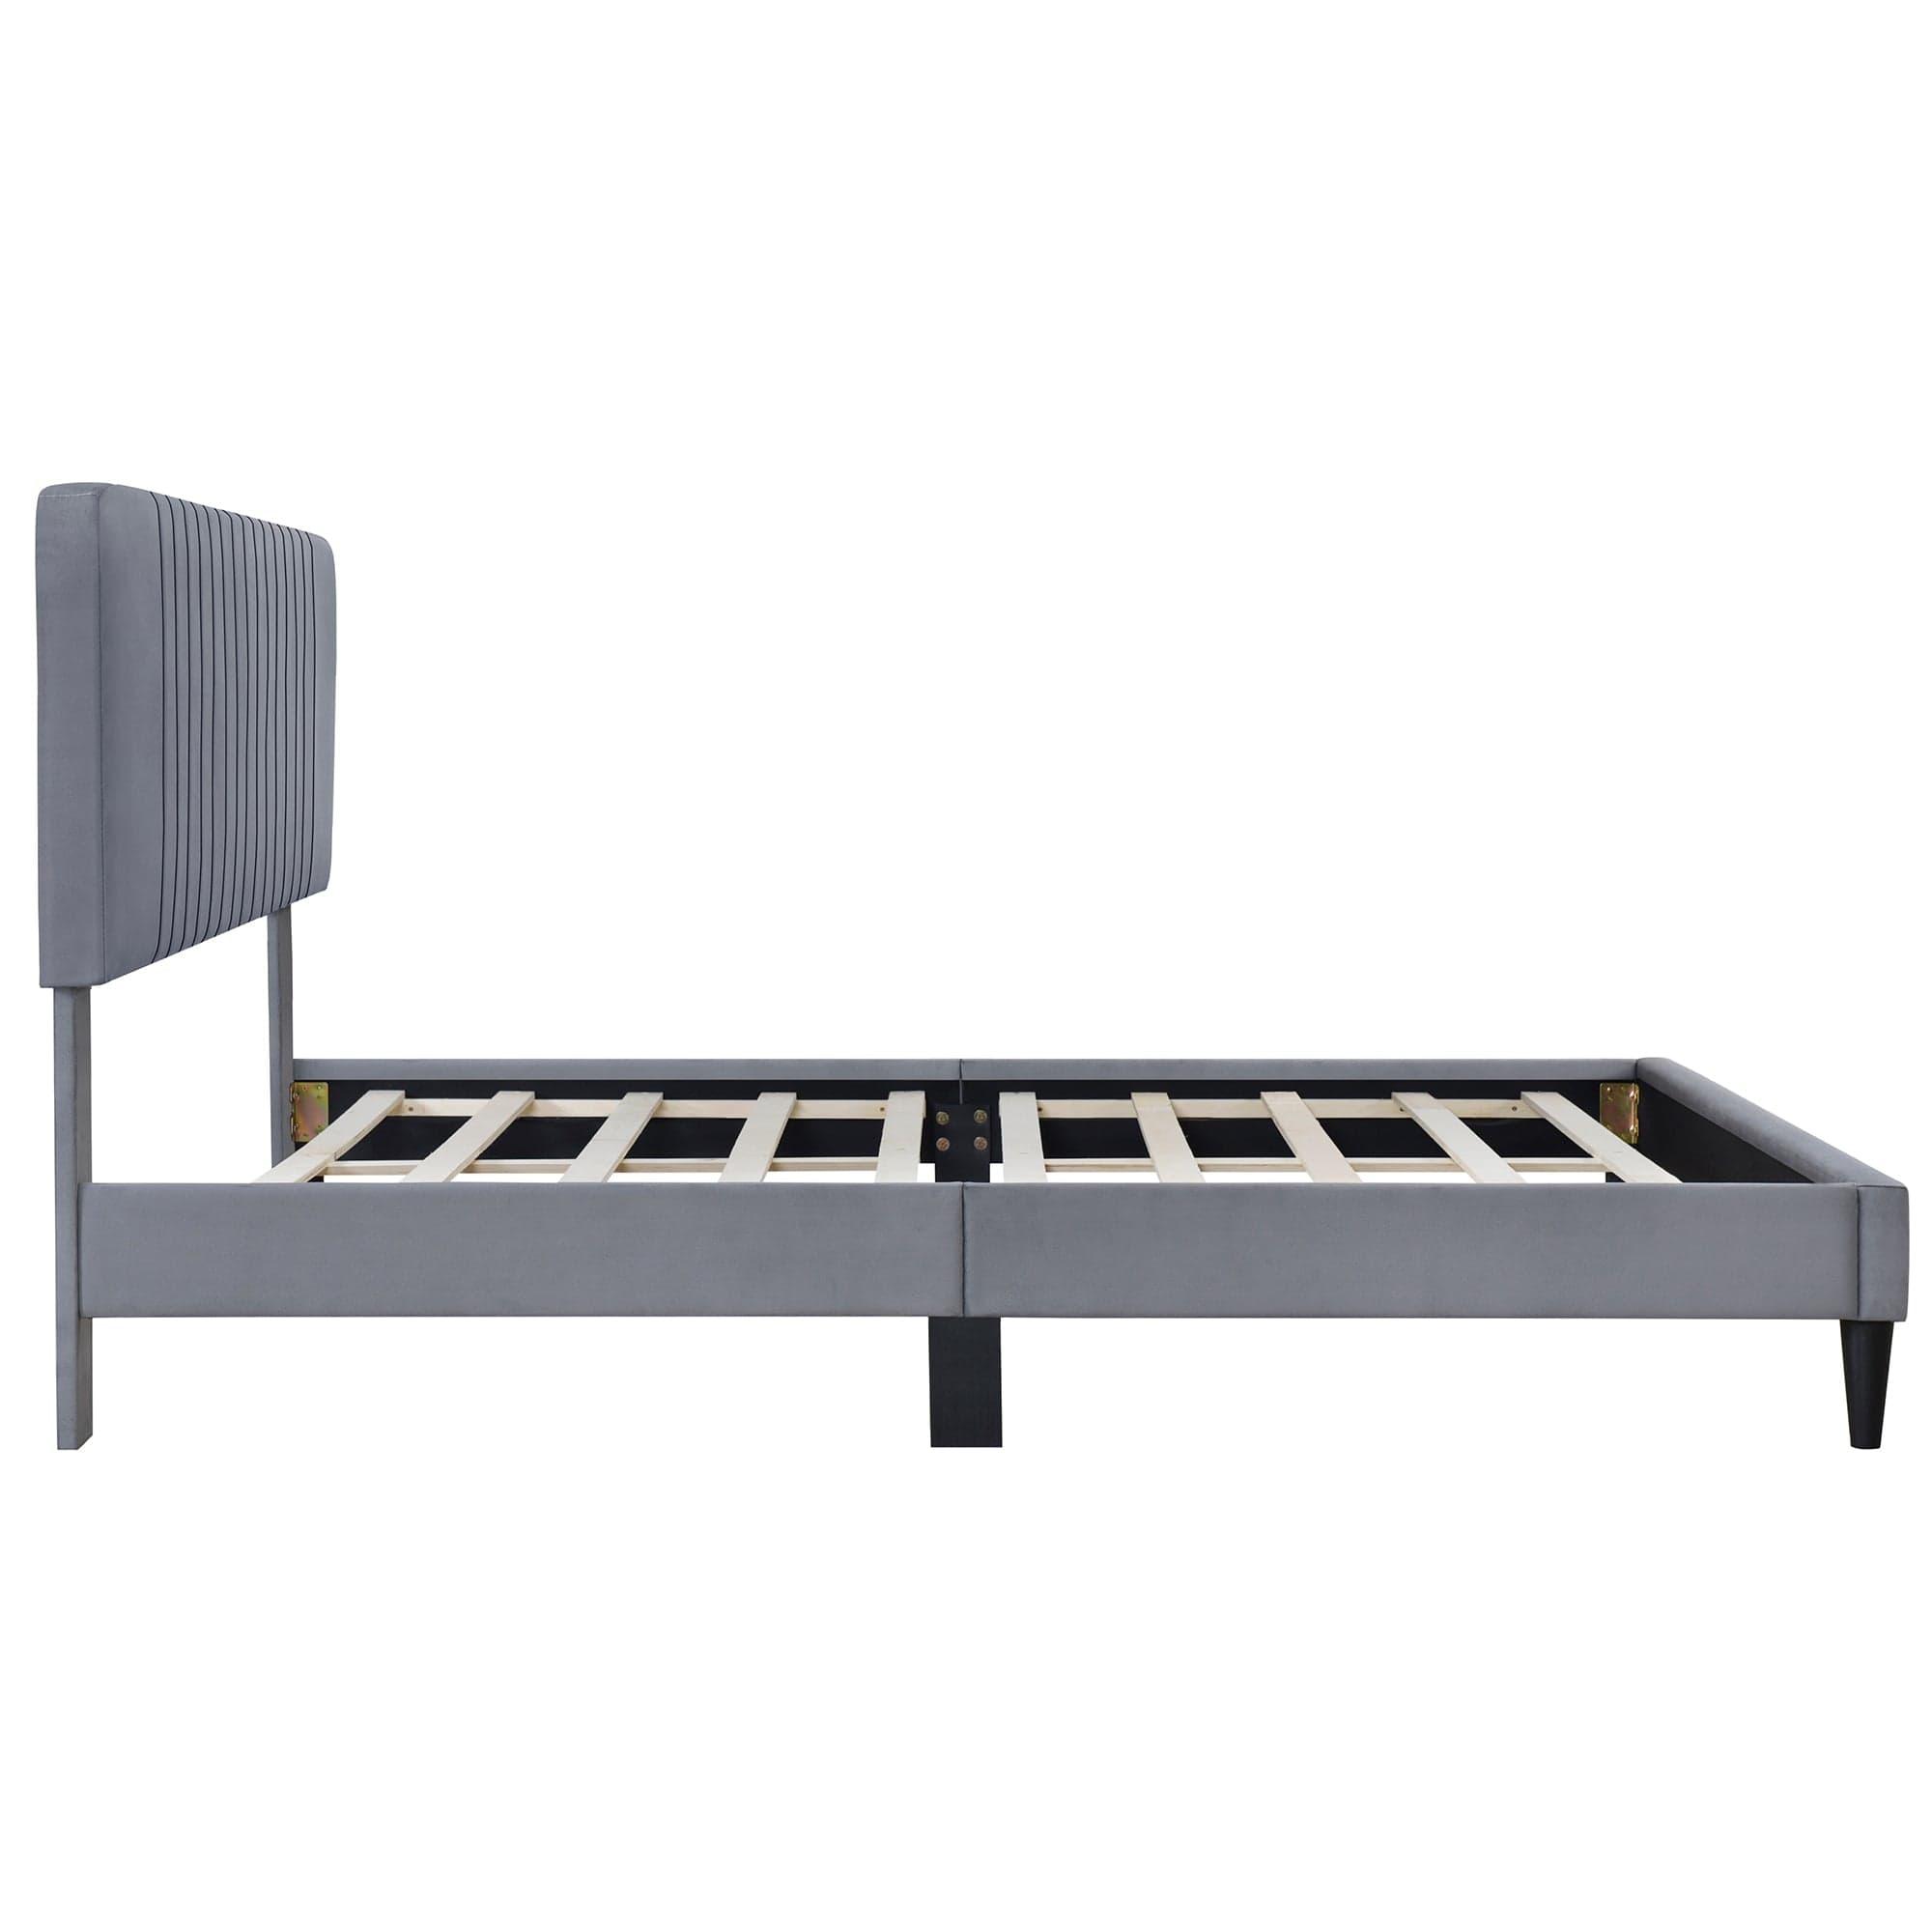 Shop Queen Size Upholstered Platform Bed,No Box Spring Needed, Velvet Fabric,Gray Mademoiselle Home Decor